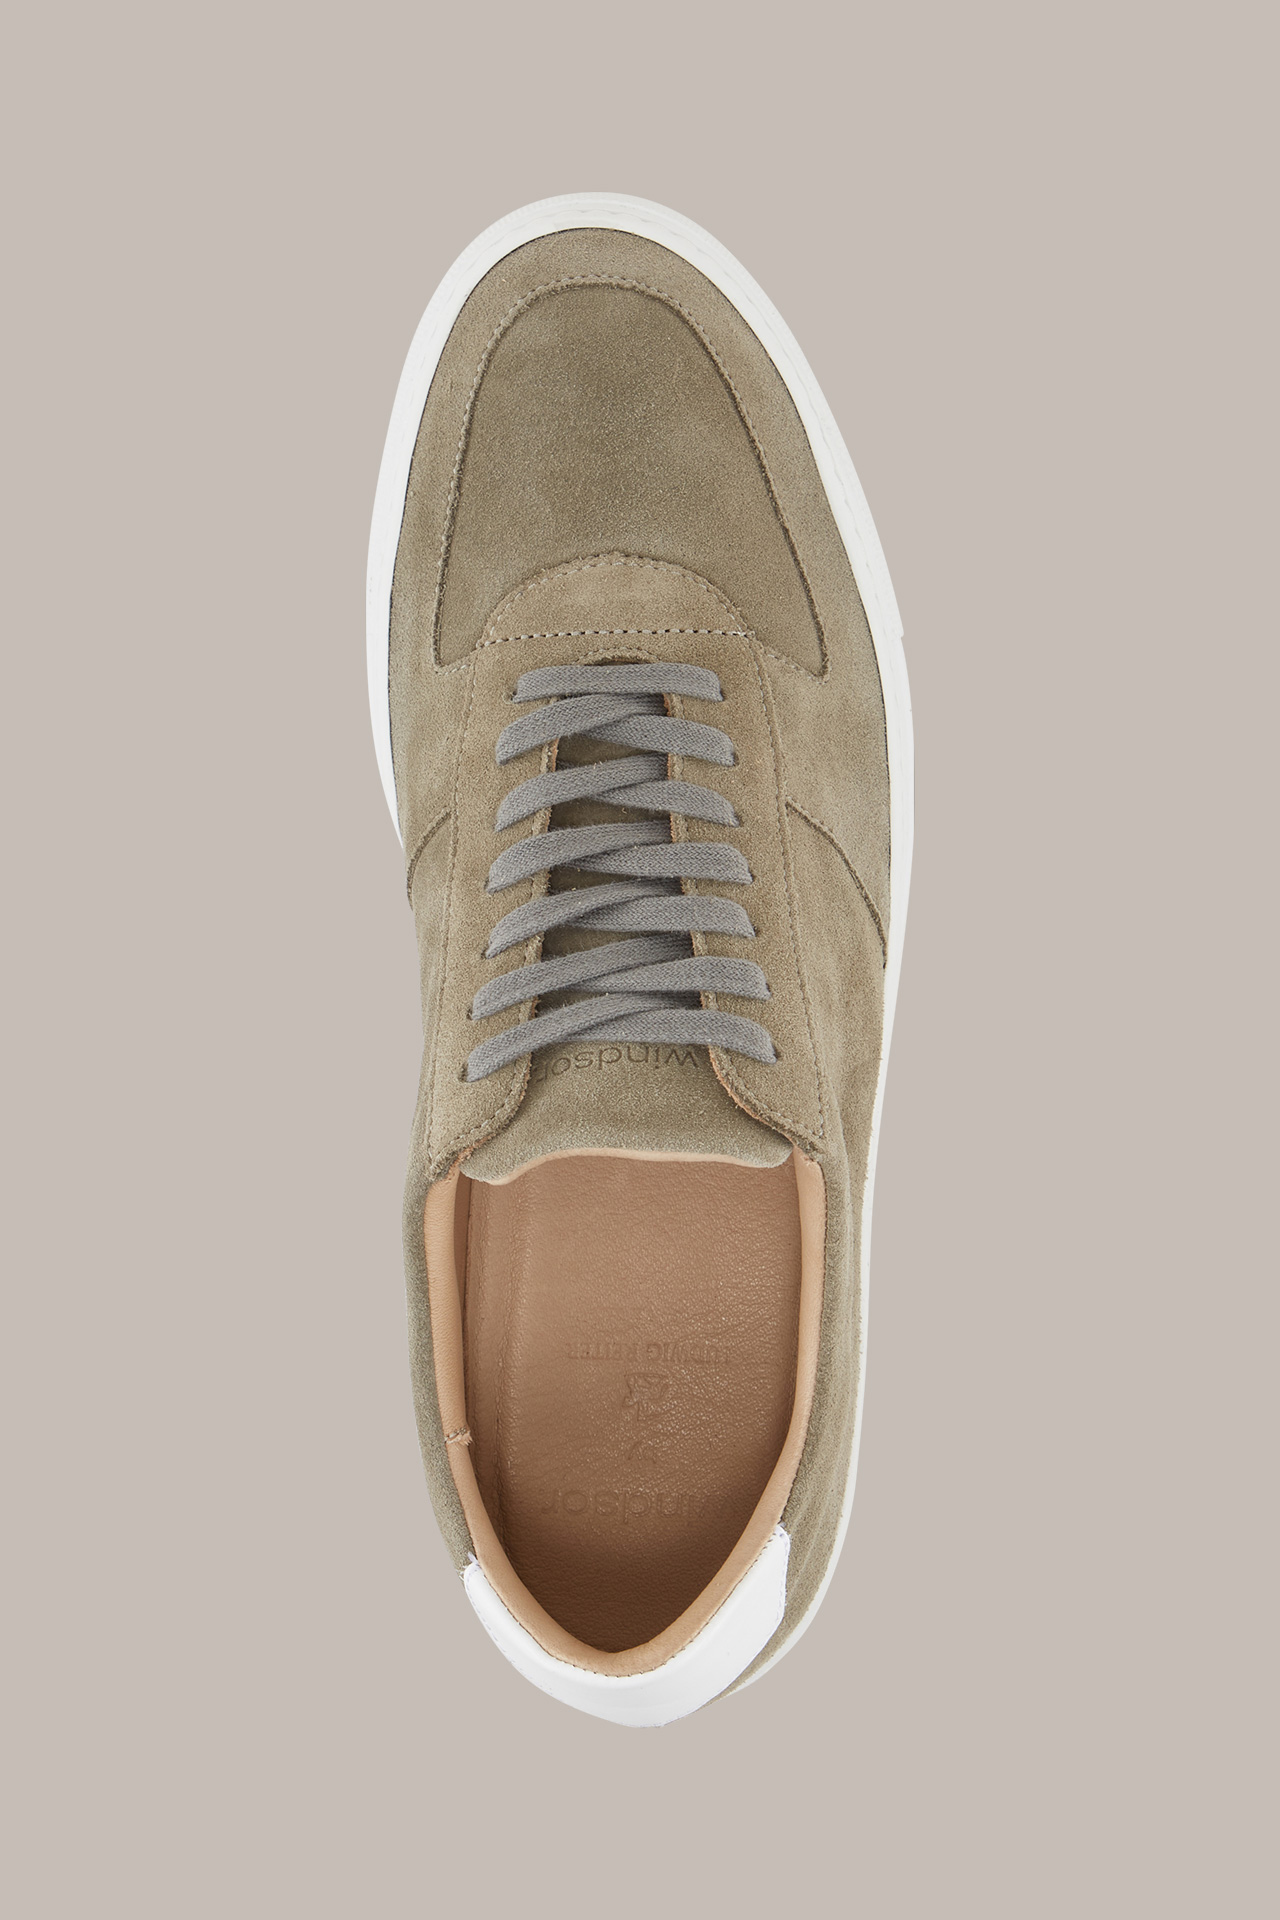  Baskets Flat Breeze by Ludwig Reiter, coloris olive et blanc